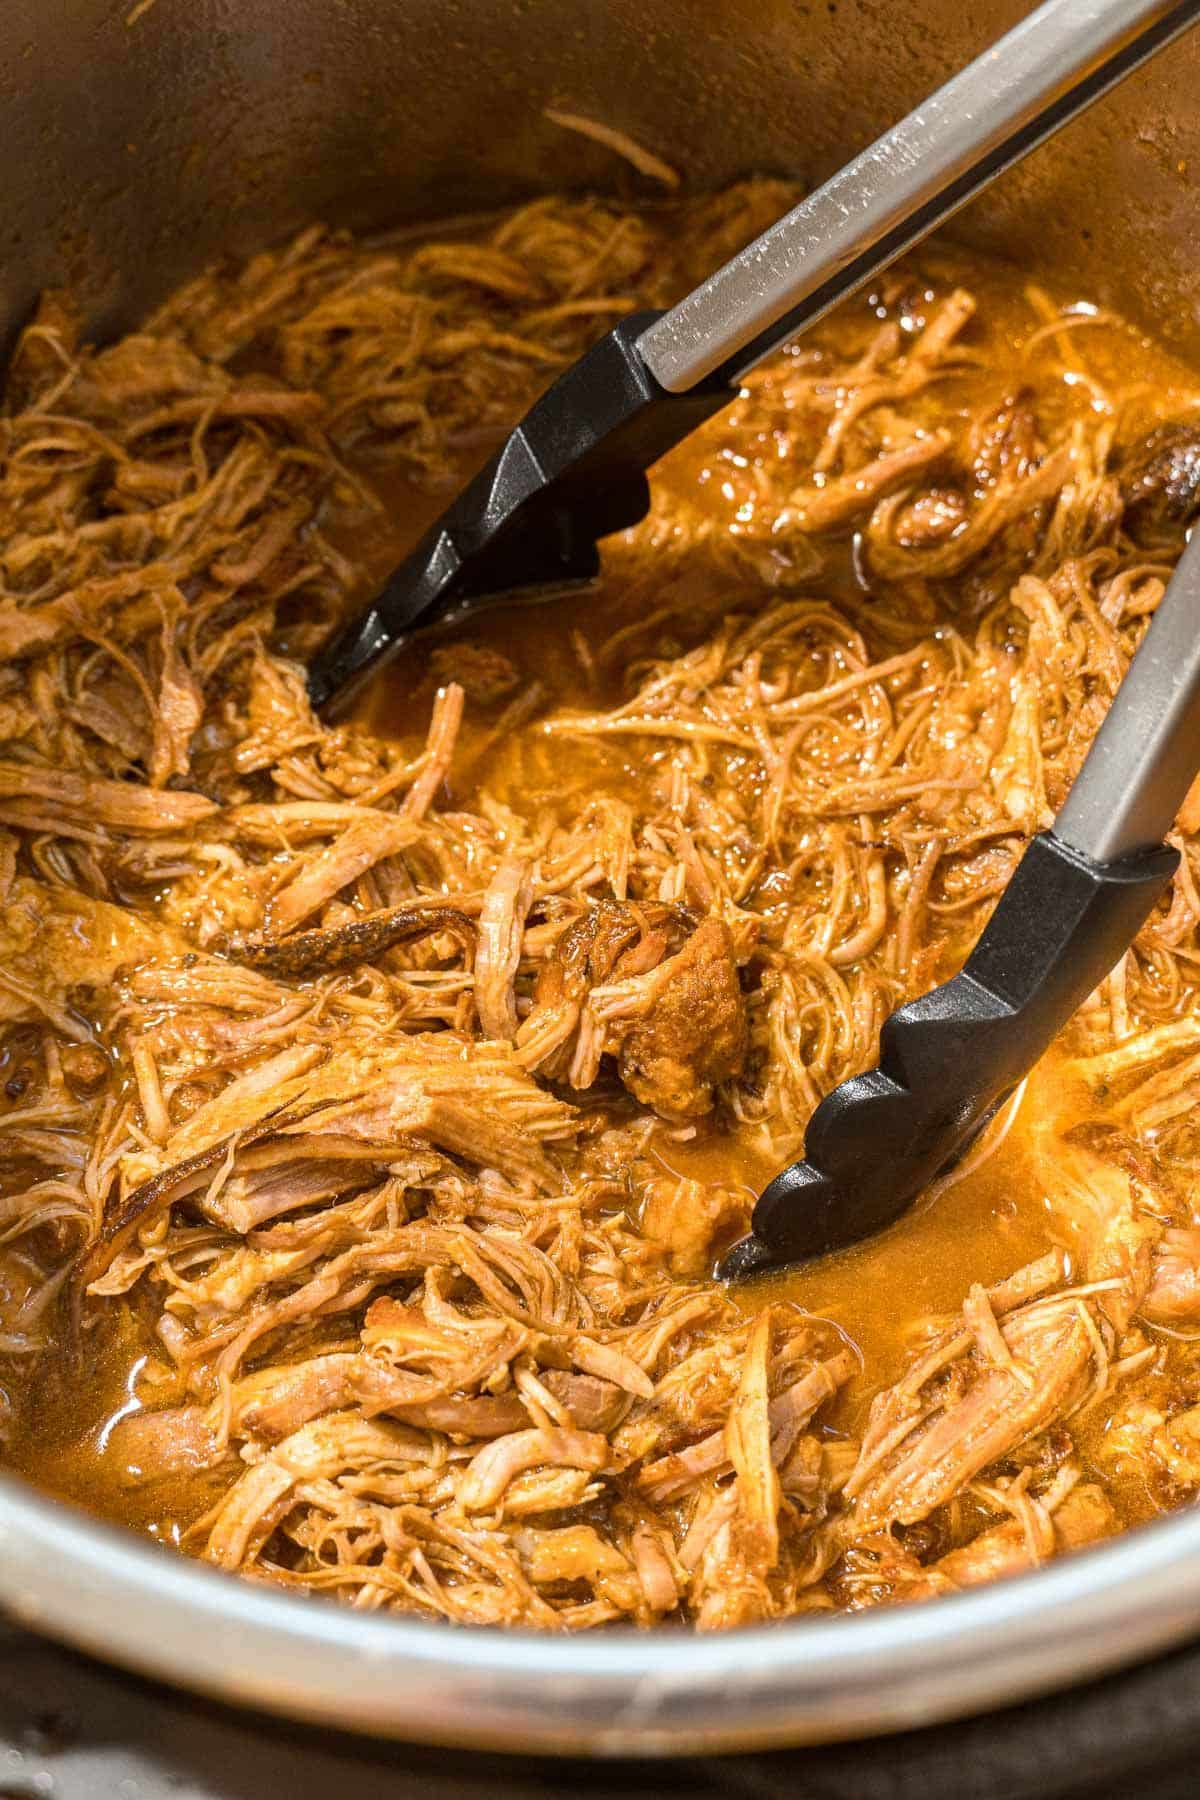 BBQ pulled pork in an Instant Pot with a pair of tongs.